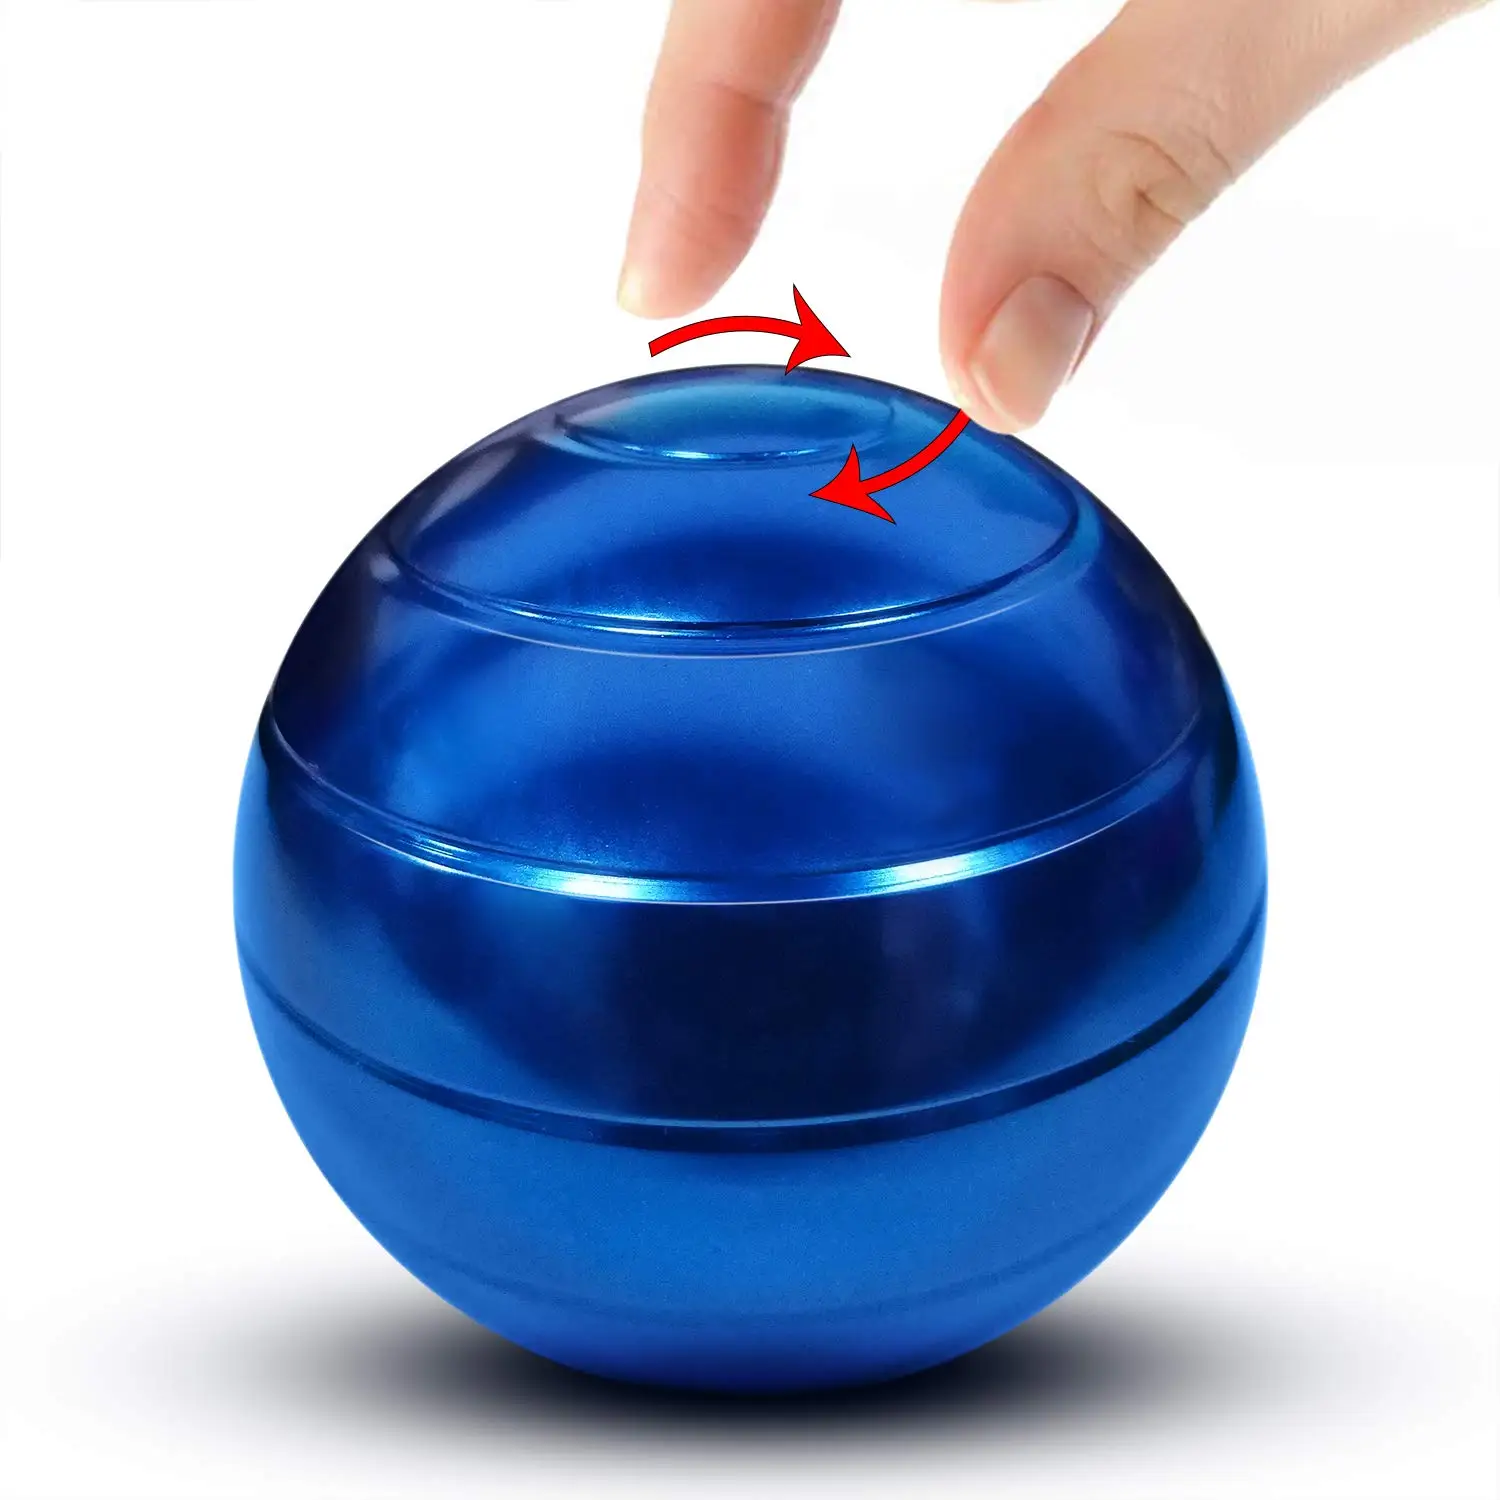 BeautyChen Kinetic Desk Toy for Adults Office Stress Relief with Full Body Optical Illusion Stress Anxiety Relief Metal Ball for Kids and Adults 2.1 Size Black 